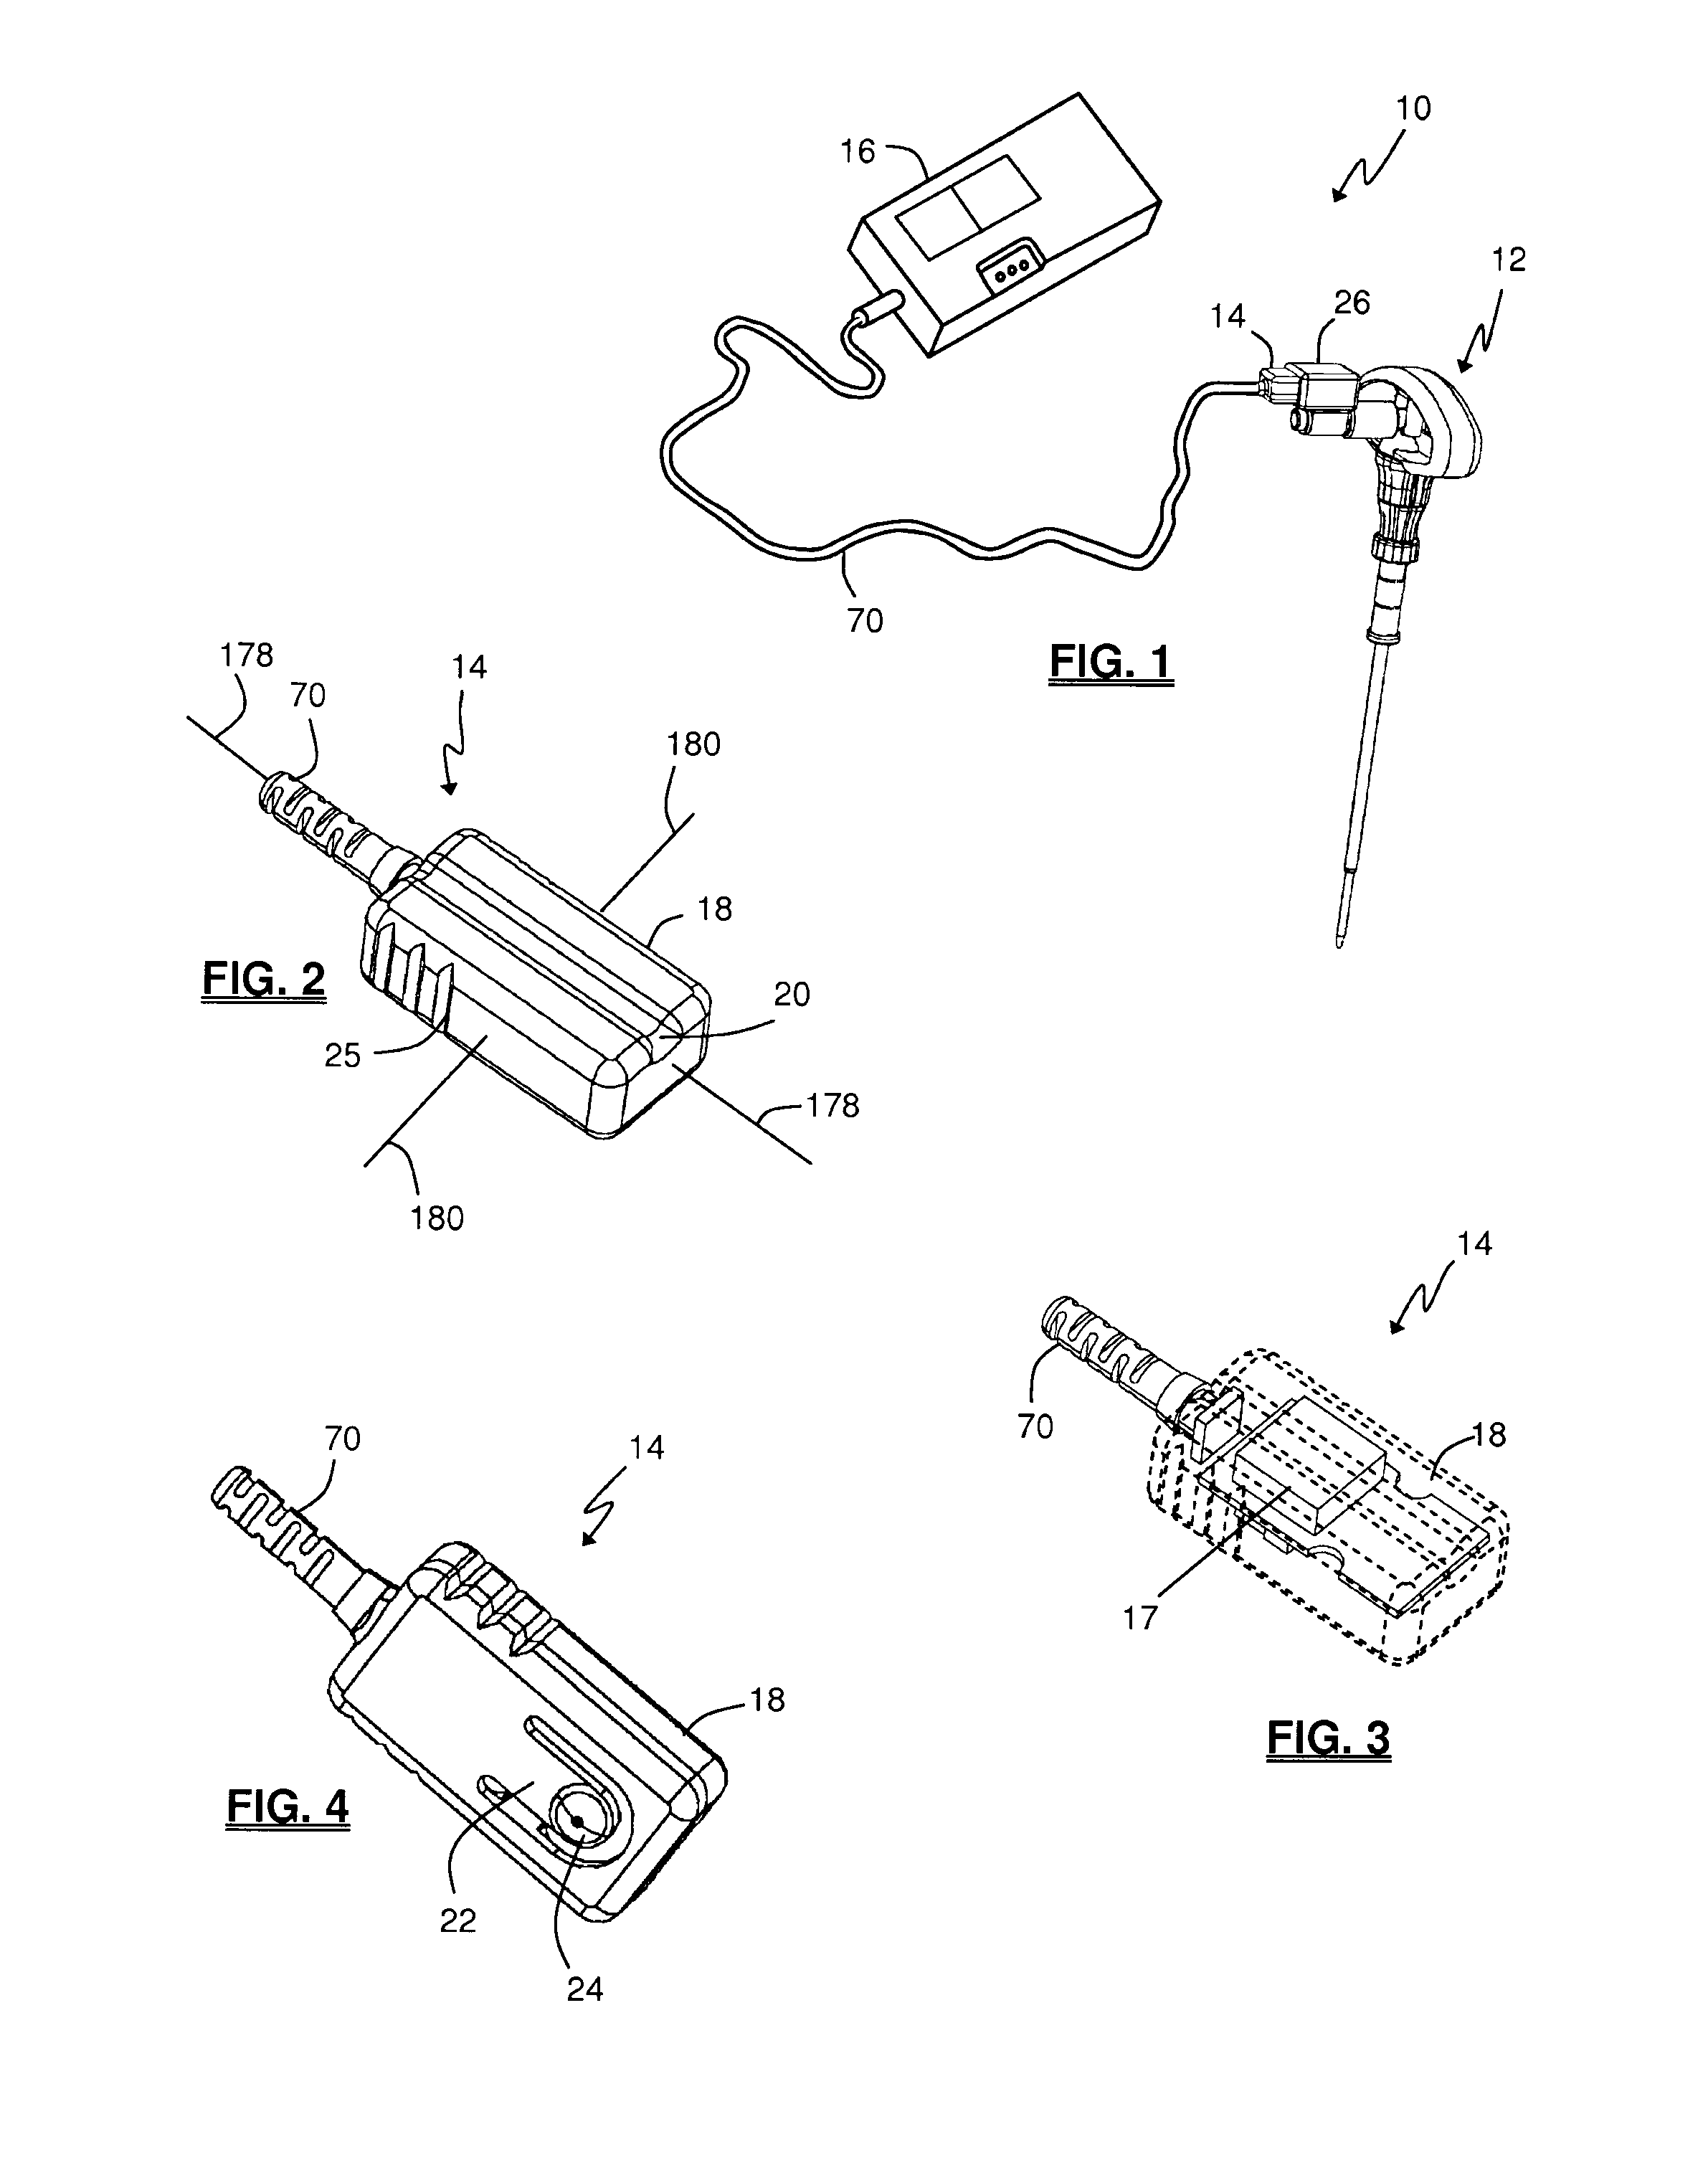 Surgical trajectory monitoring system and related methods